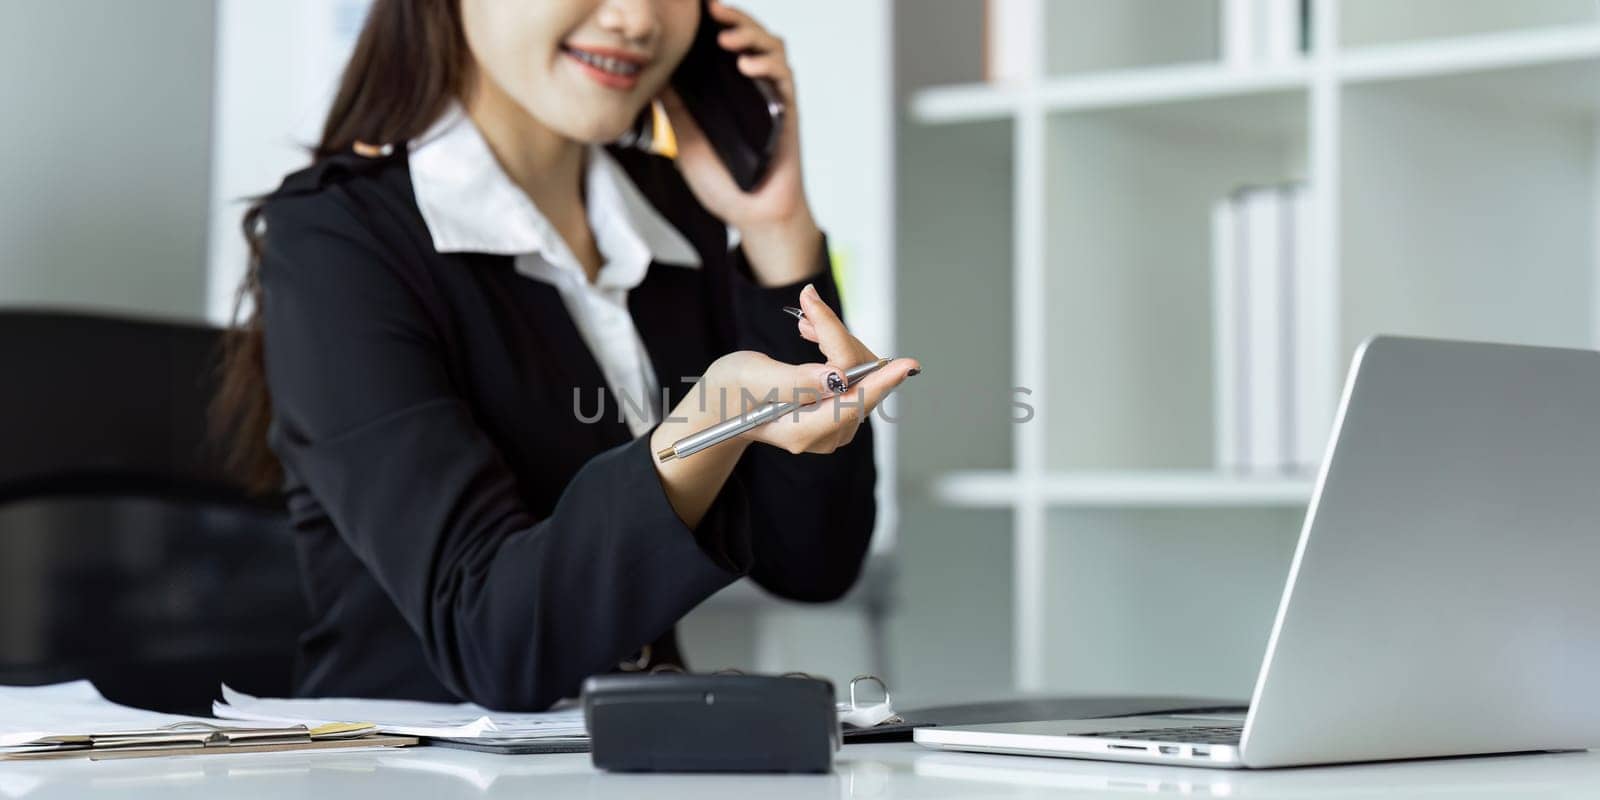 Businesswoman on the phone and using laptop at office. Businesswoman professional talking on mobile phone by itchaznong